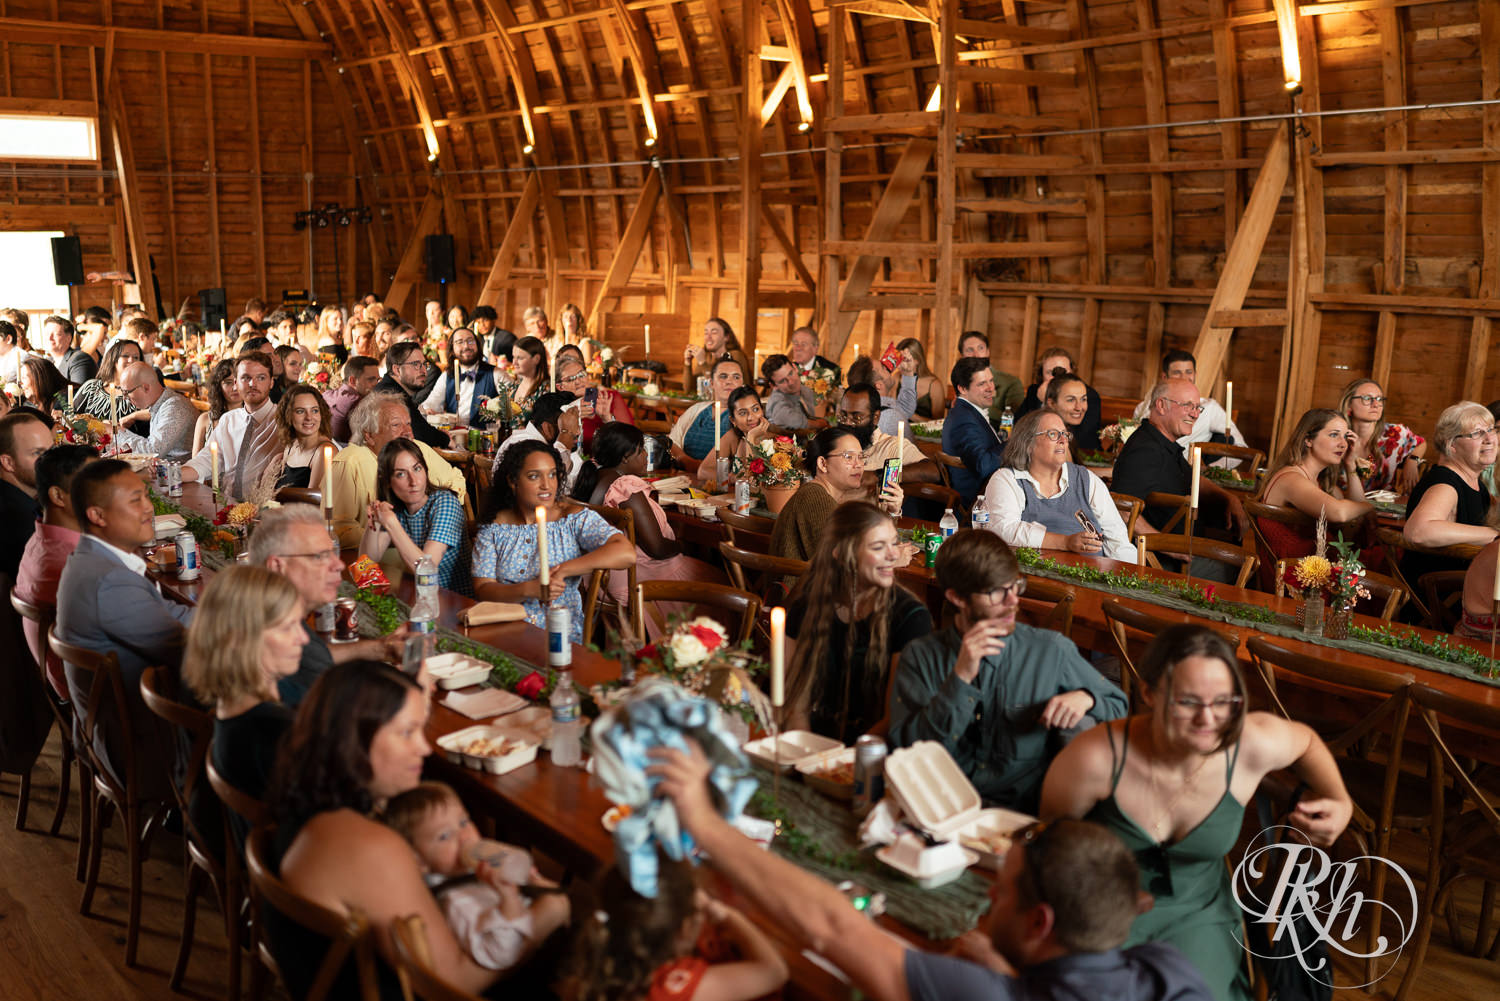 Guests smile during wedding reception at Hayvn at Hay River in Boyceville, Wisconsin. 